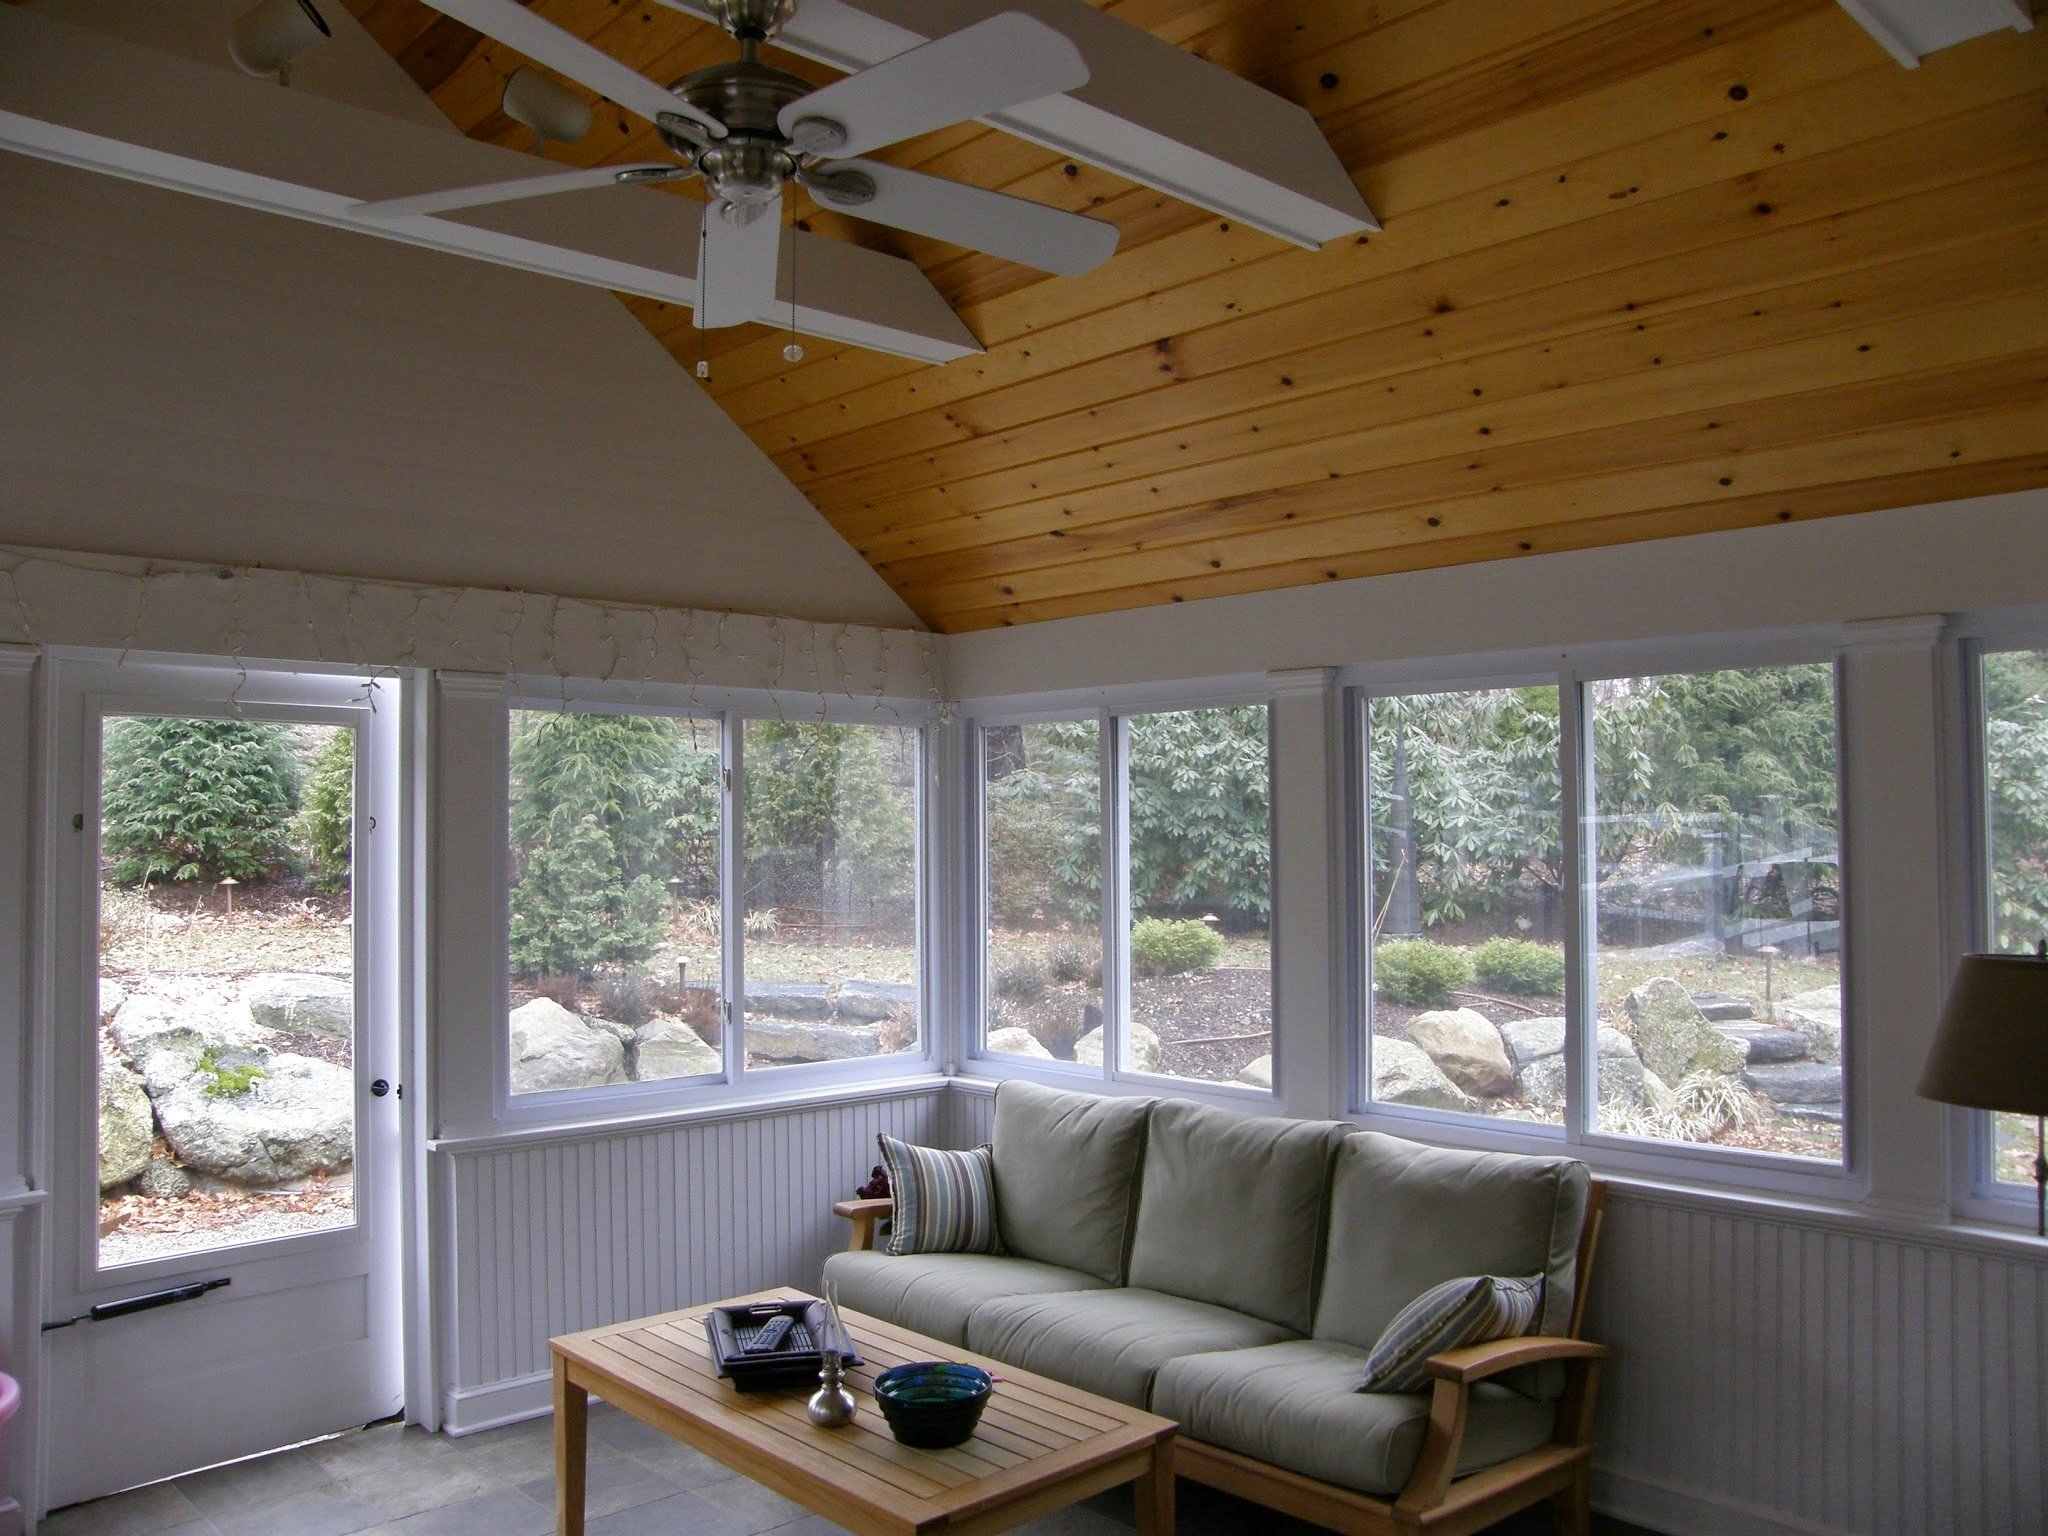 sunroom addition with tons of natural lighting and ceiling fan